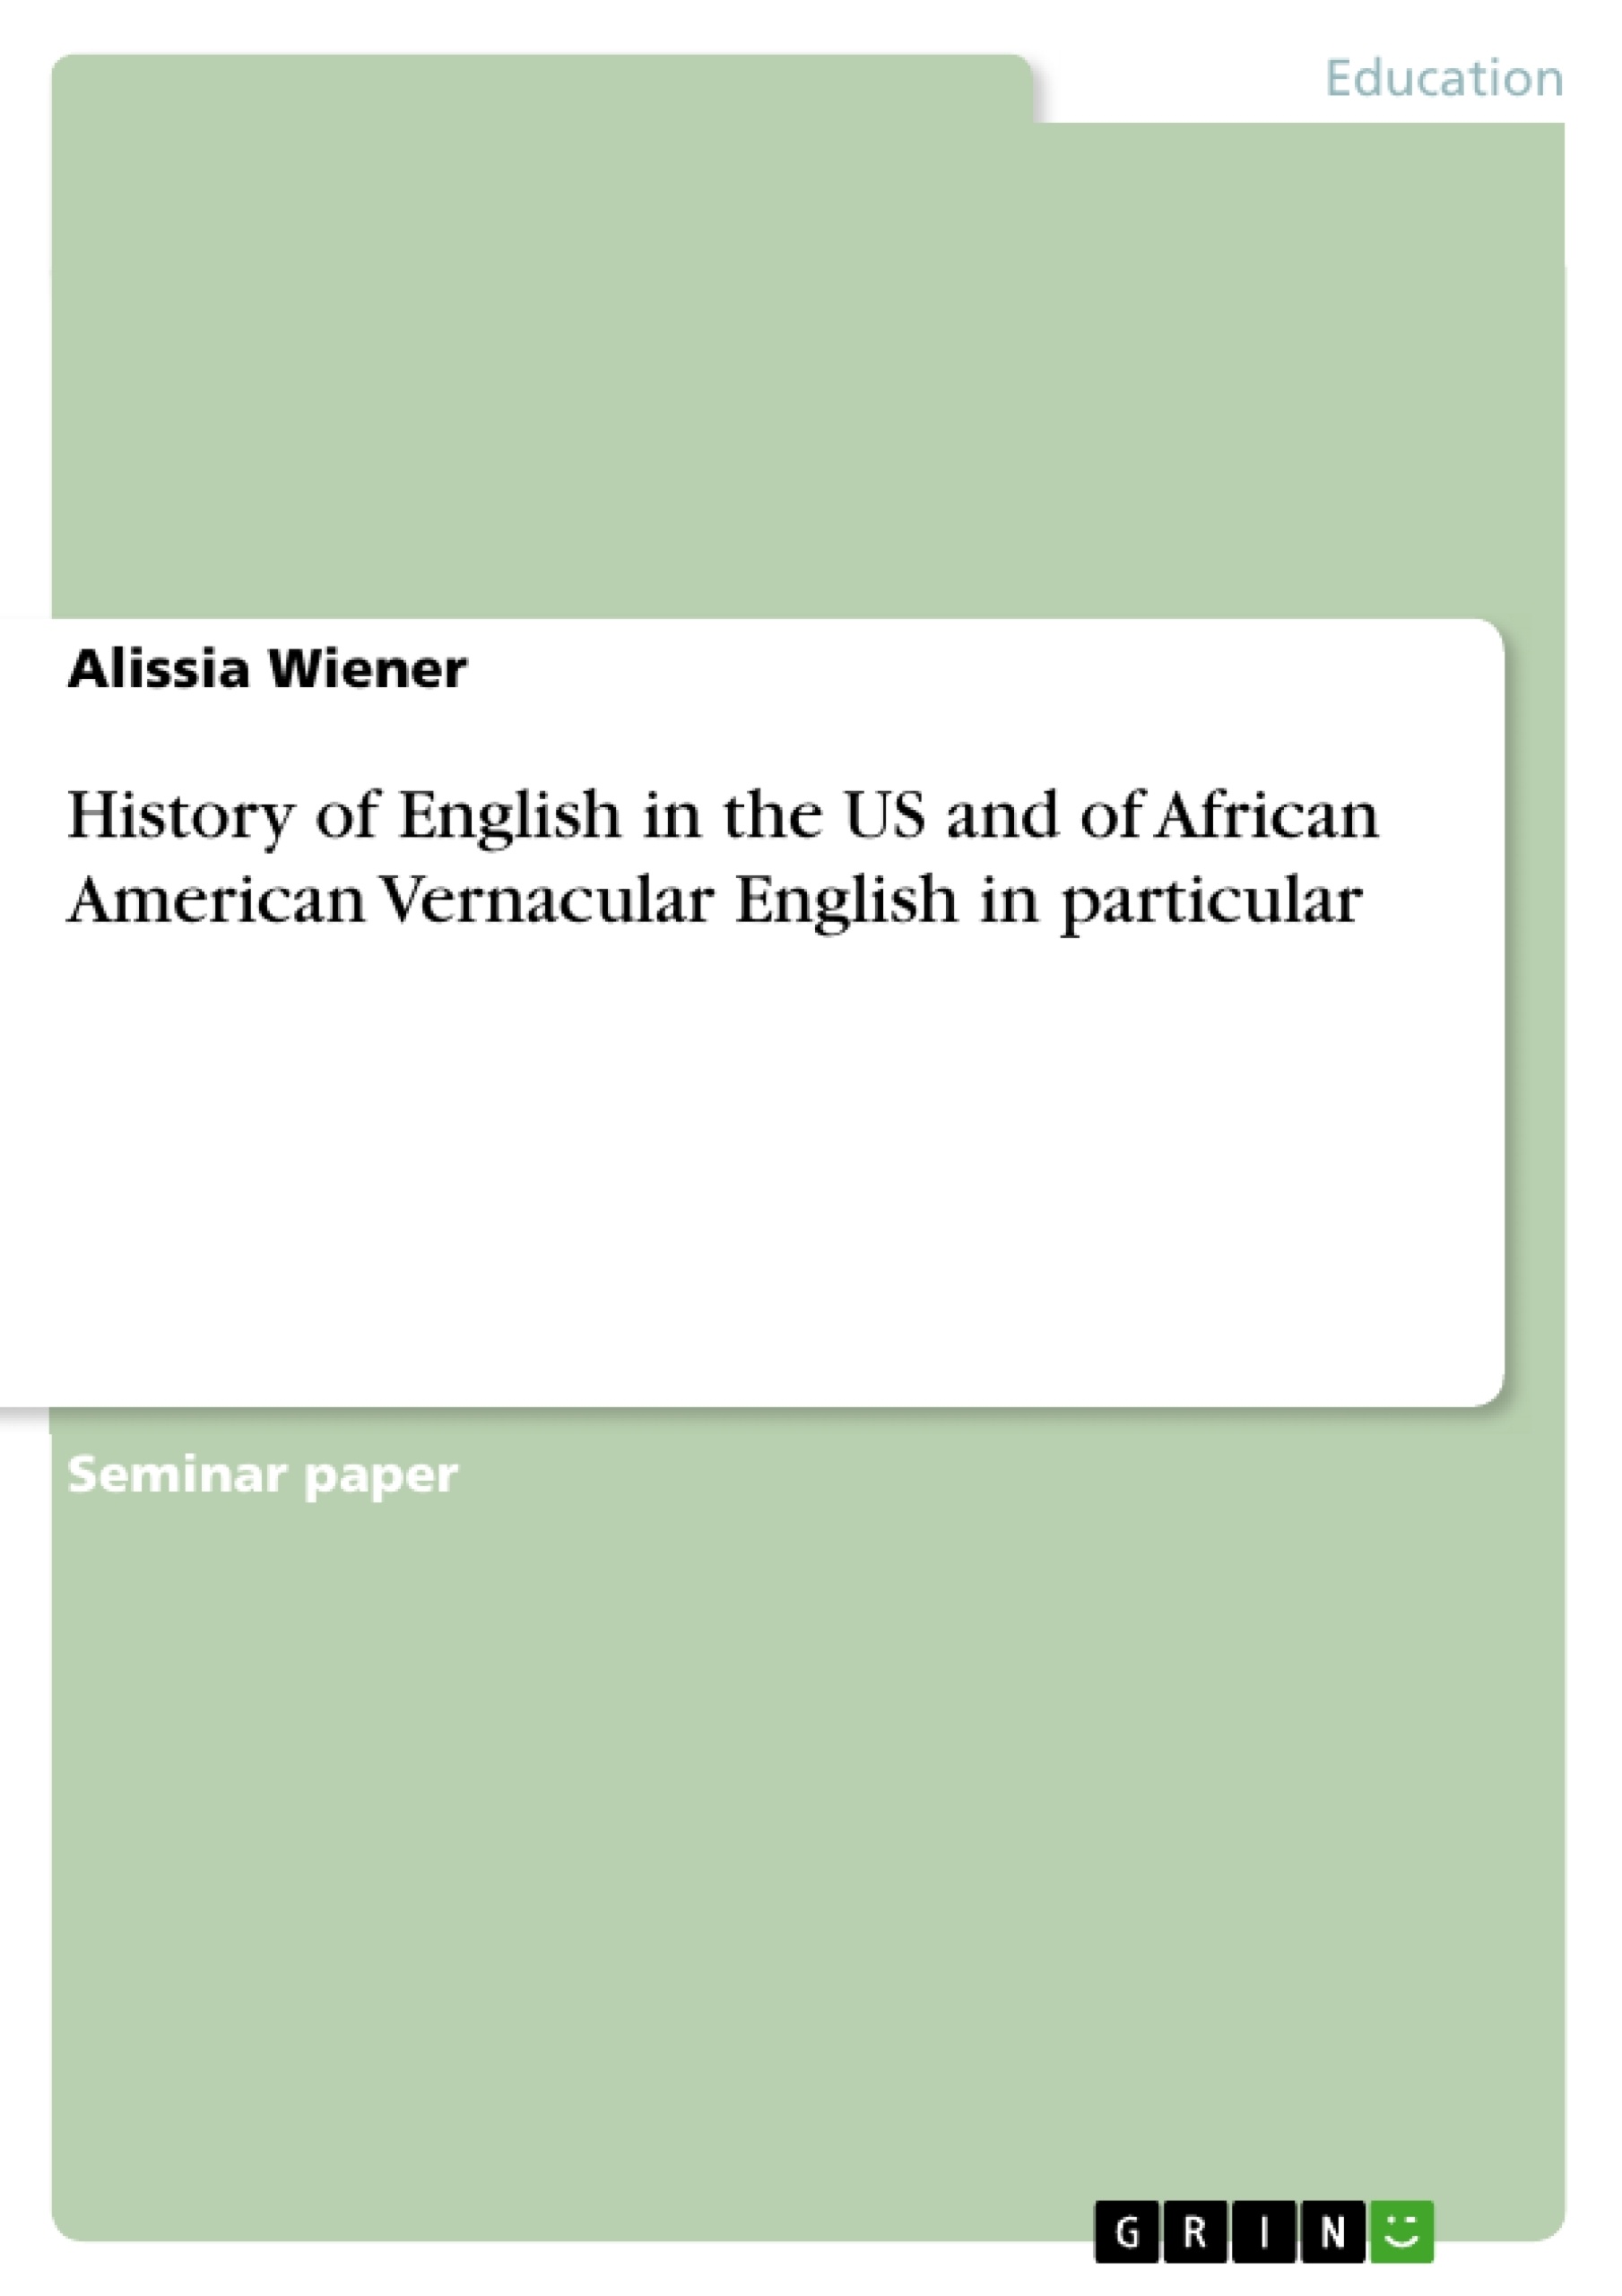 Title: History of English in the US and of African American Vernacular English in particular